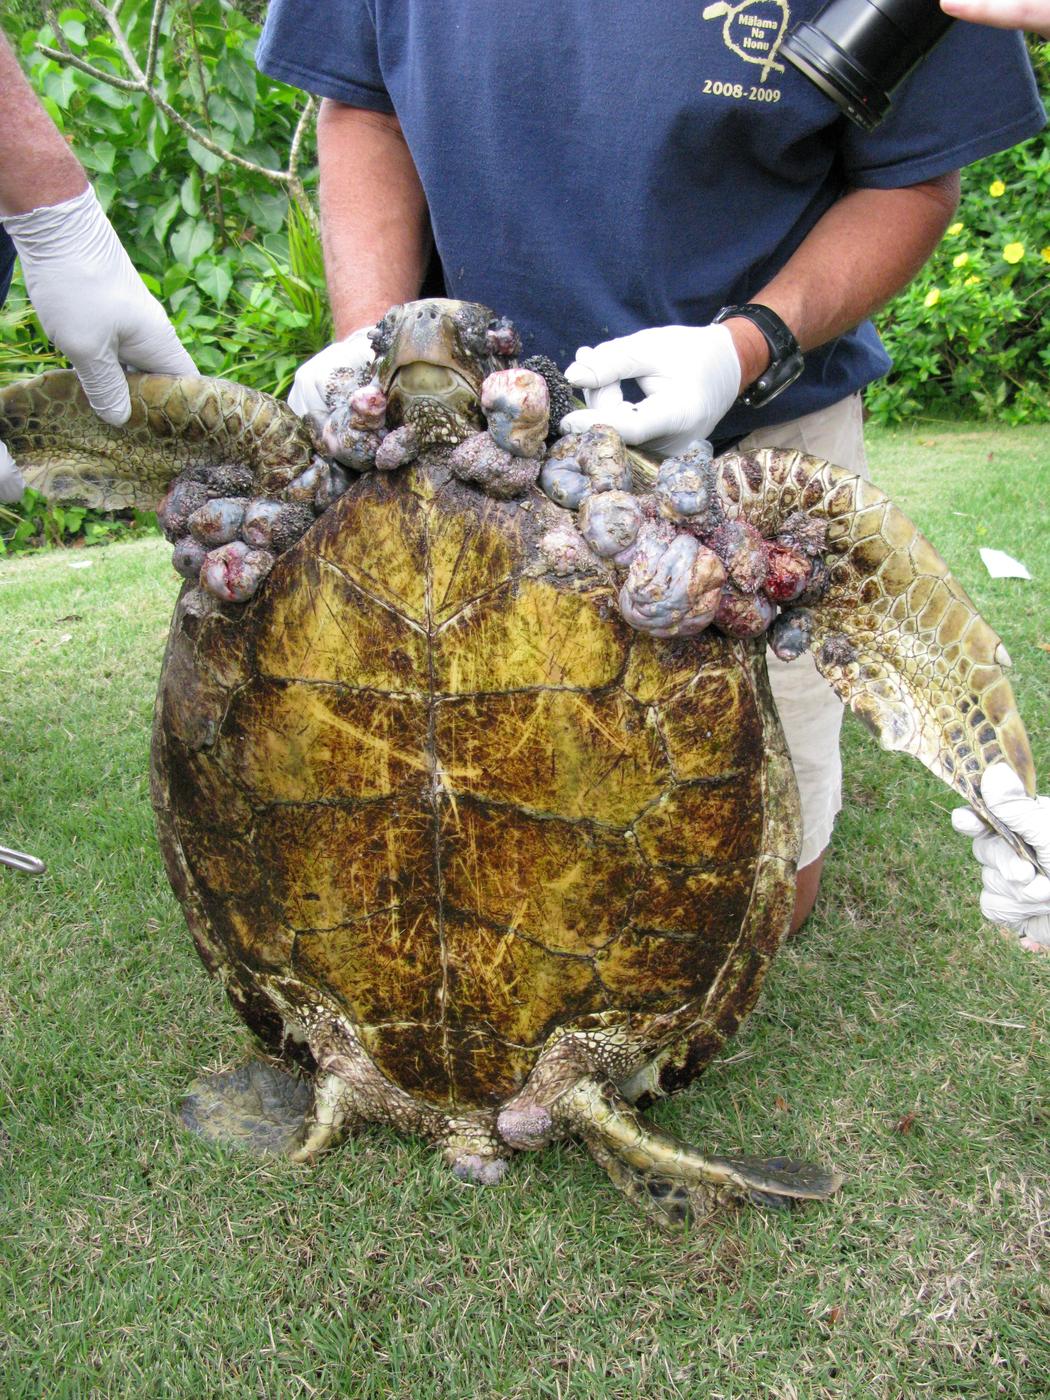 Underside of a turtle with growths